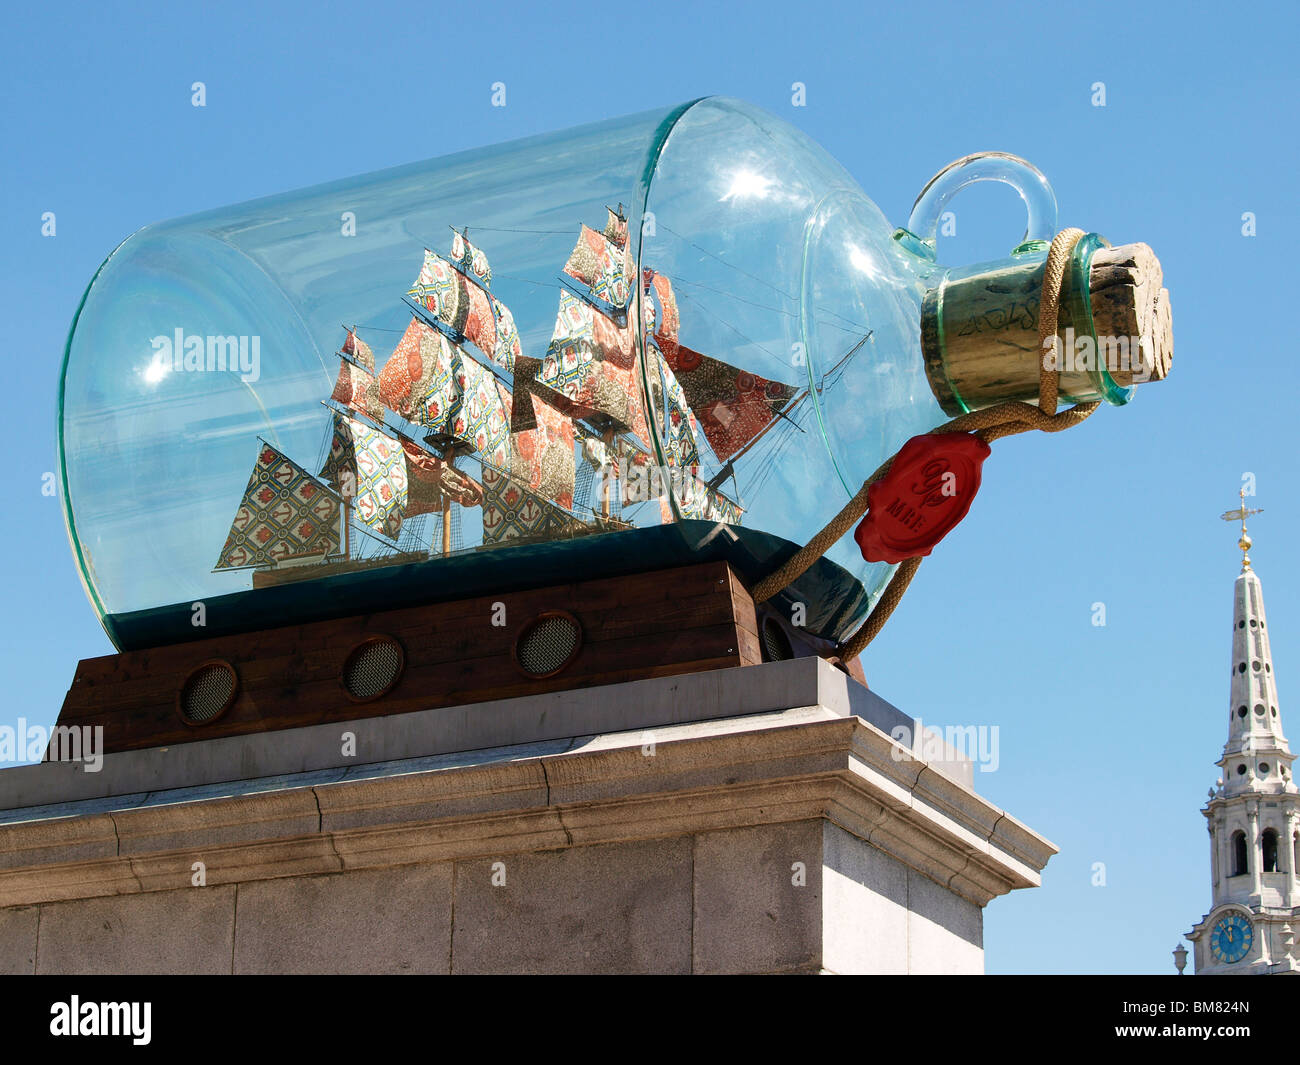 The sculpture of HMS Victory by Yinka Shonibare on the Fourth Plinth in Trafalgar Square was unveiled today 24th May 2010. Stock Photo